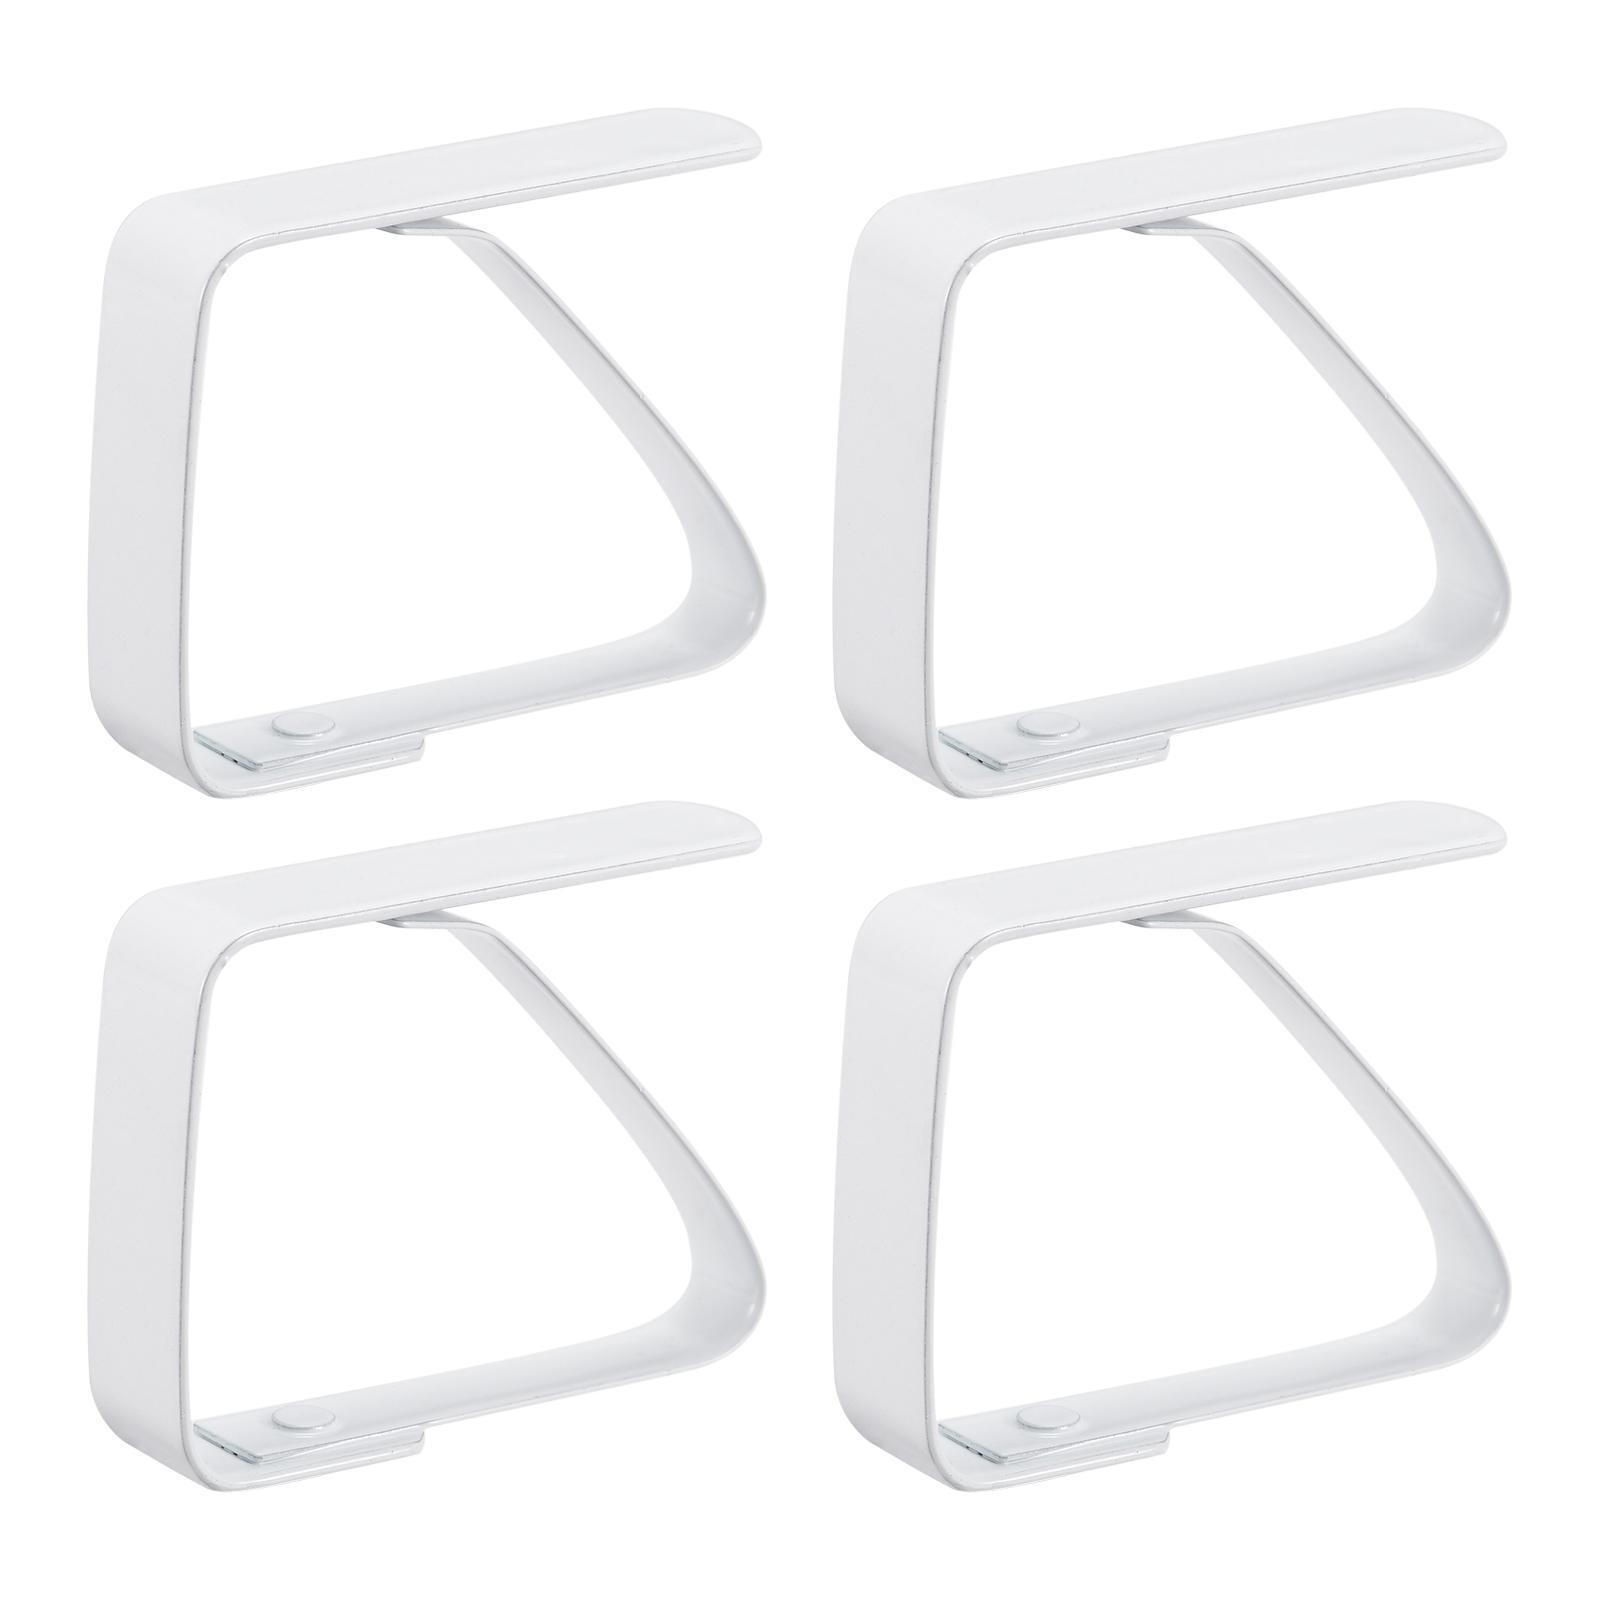 Tablecloth Clips 50mm X 40mm 420 Stainless Steel Table Cloth Holder White 4 Pcs